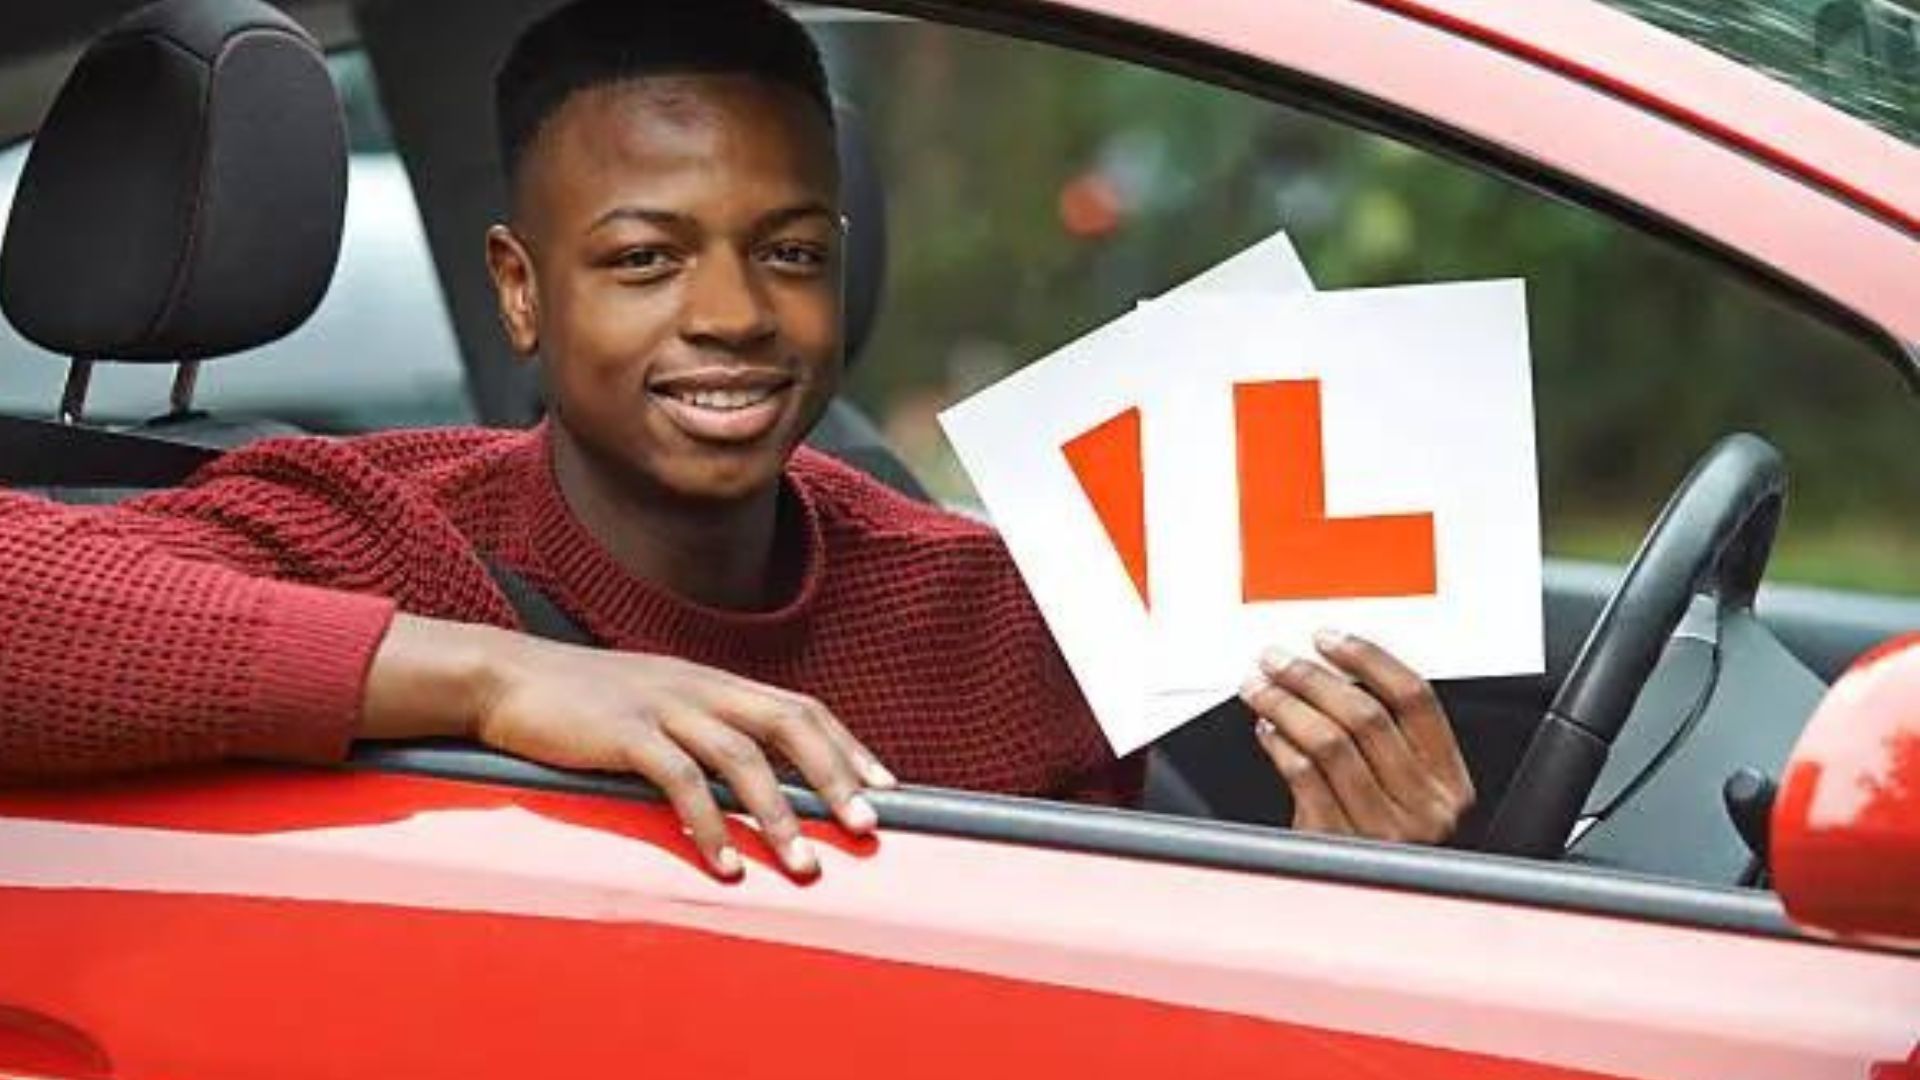 Free Learners License Test Online in SA